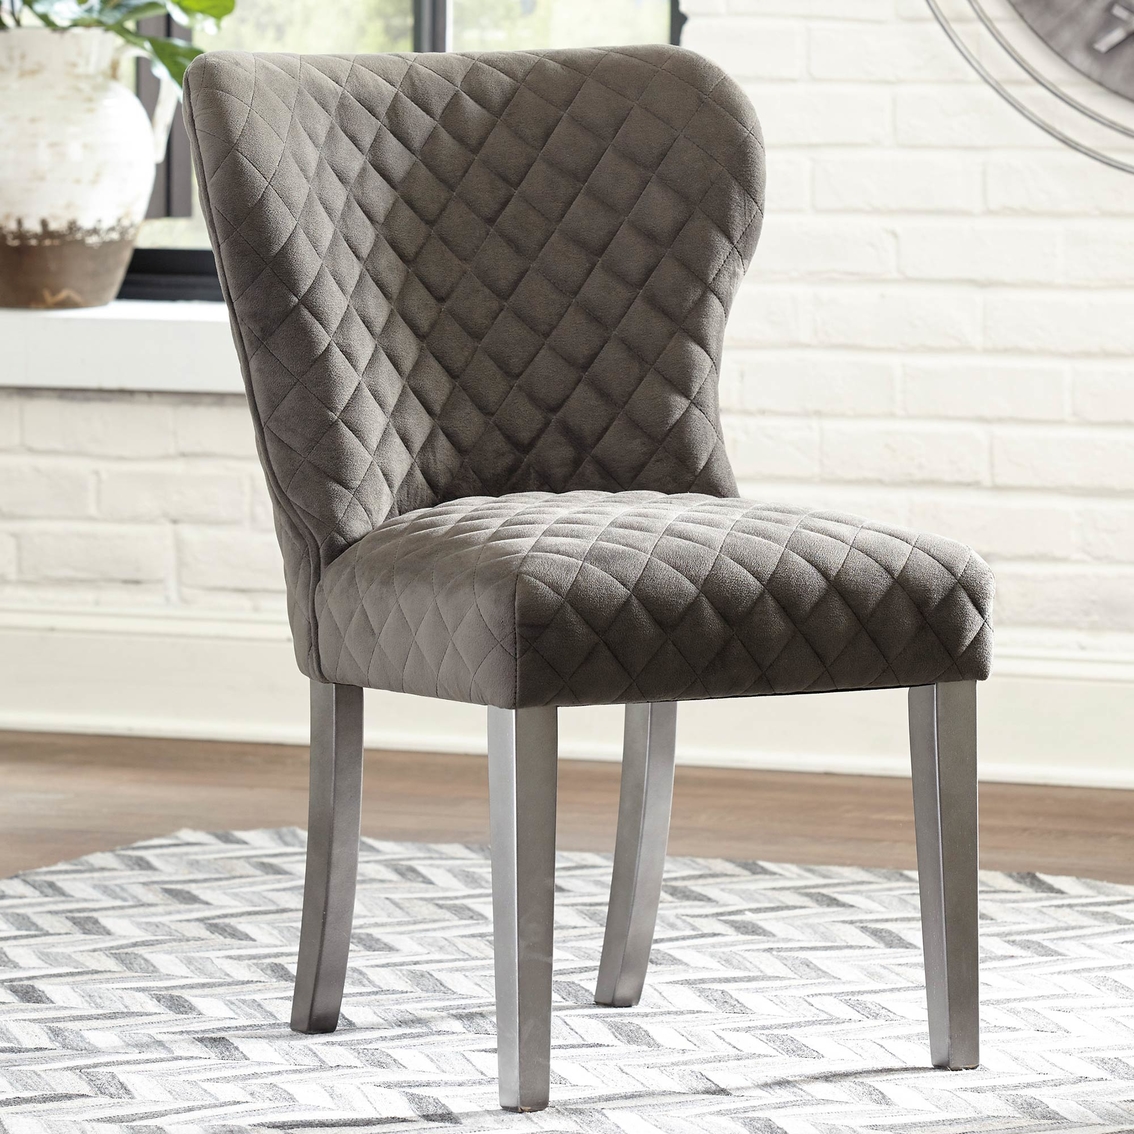 Signature Design by Ashley Rozzelli Dining Side Chair 2 pk. - Image 2 of 2